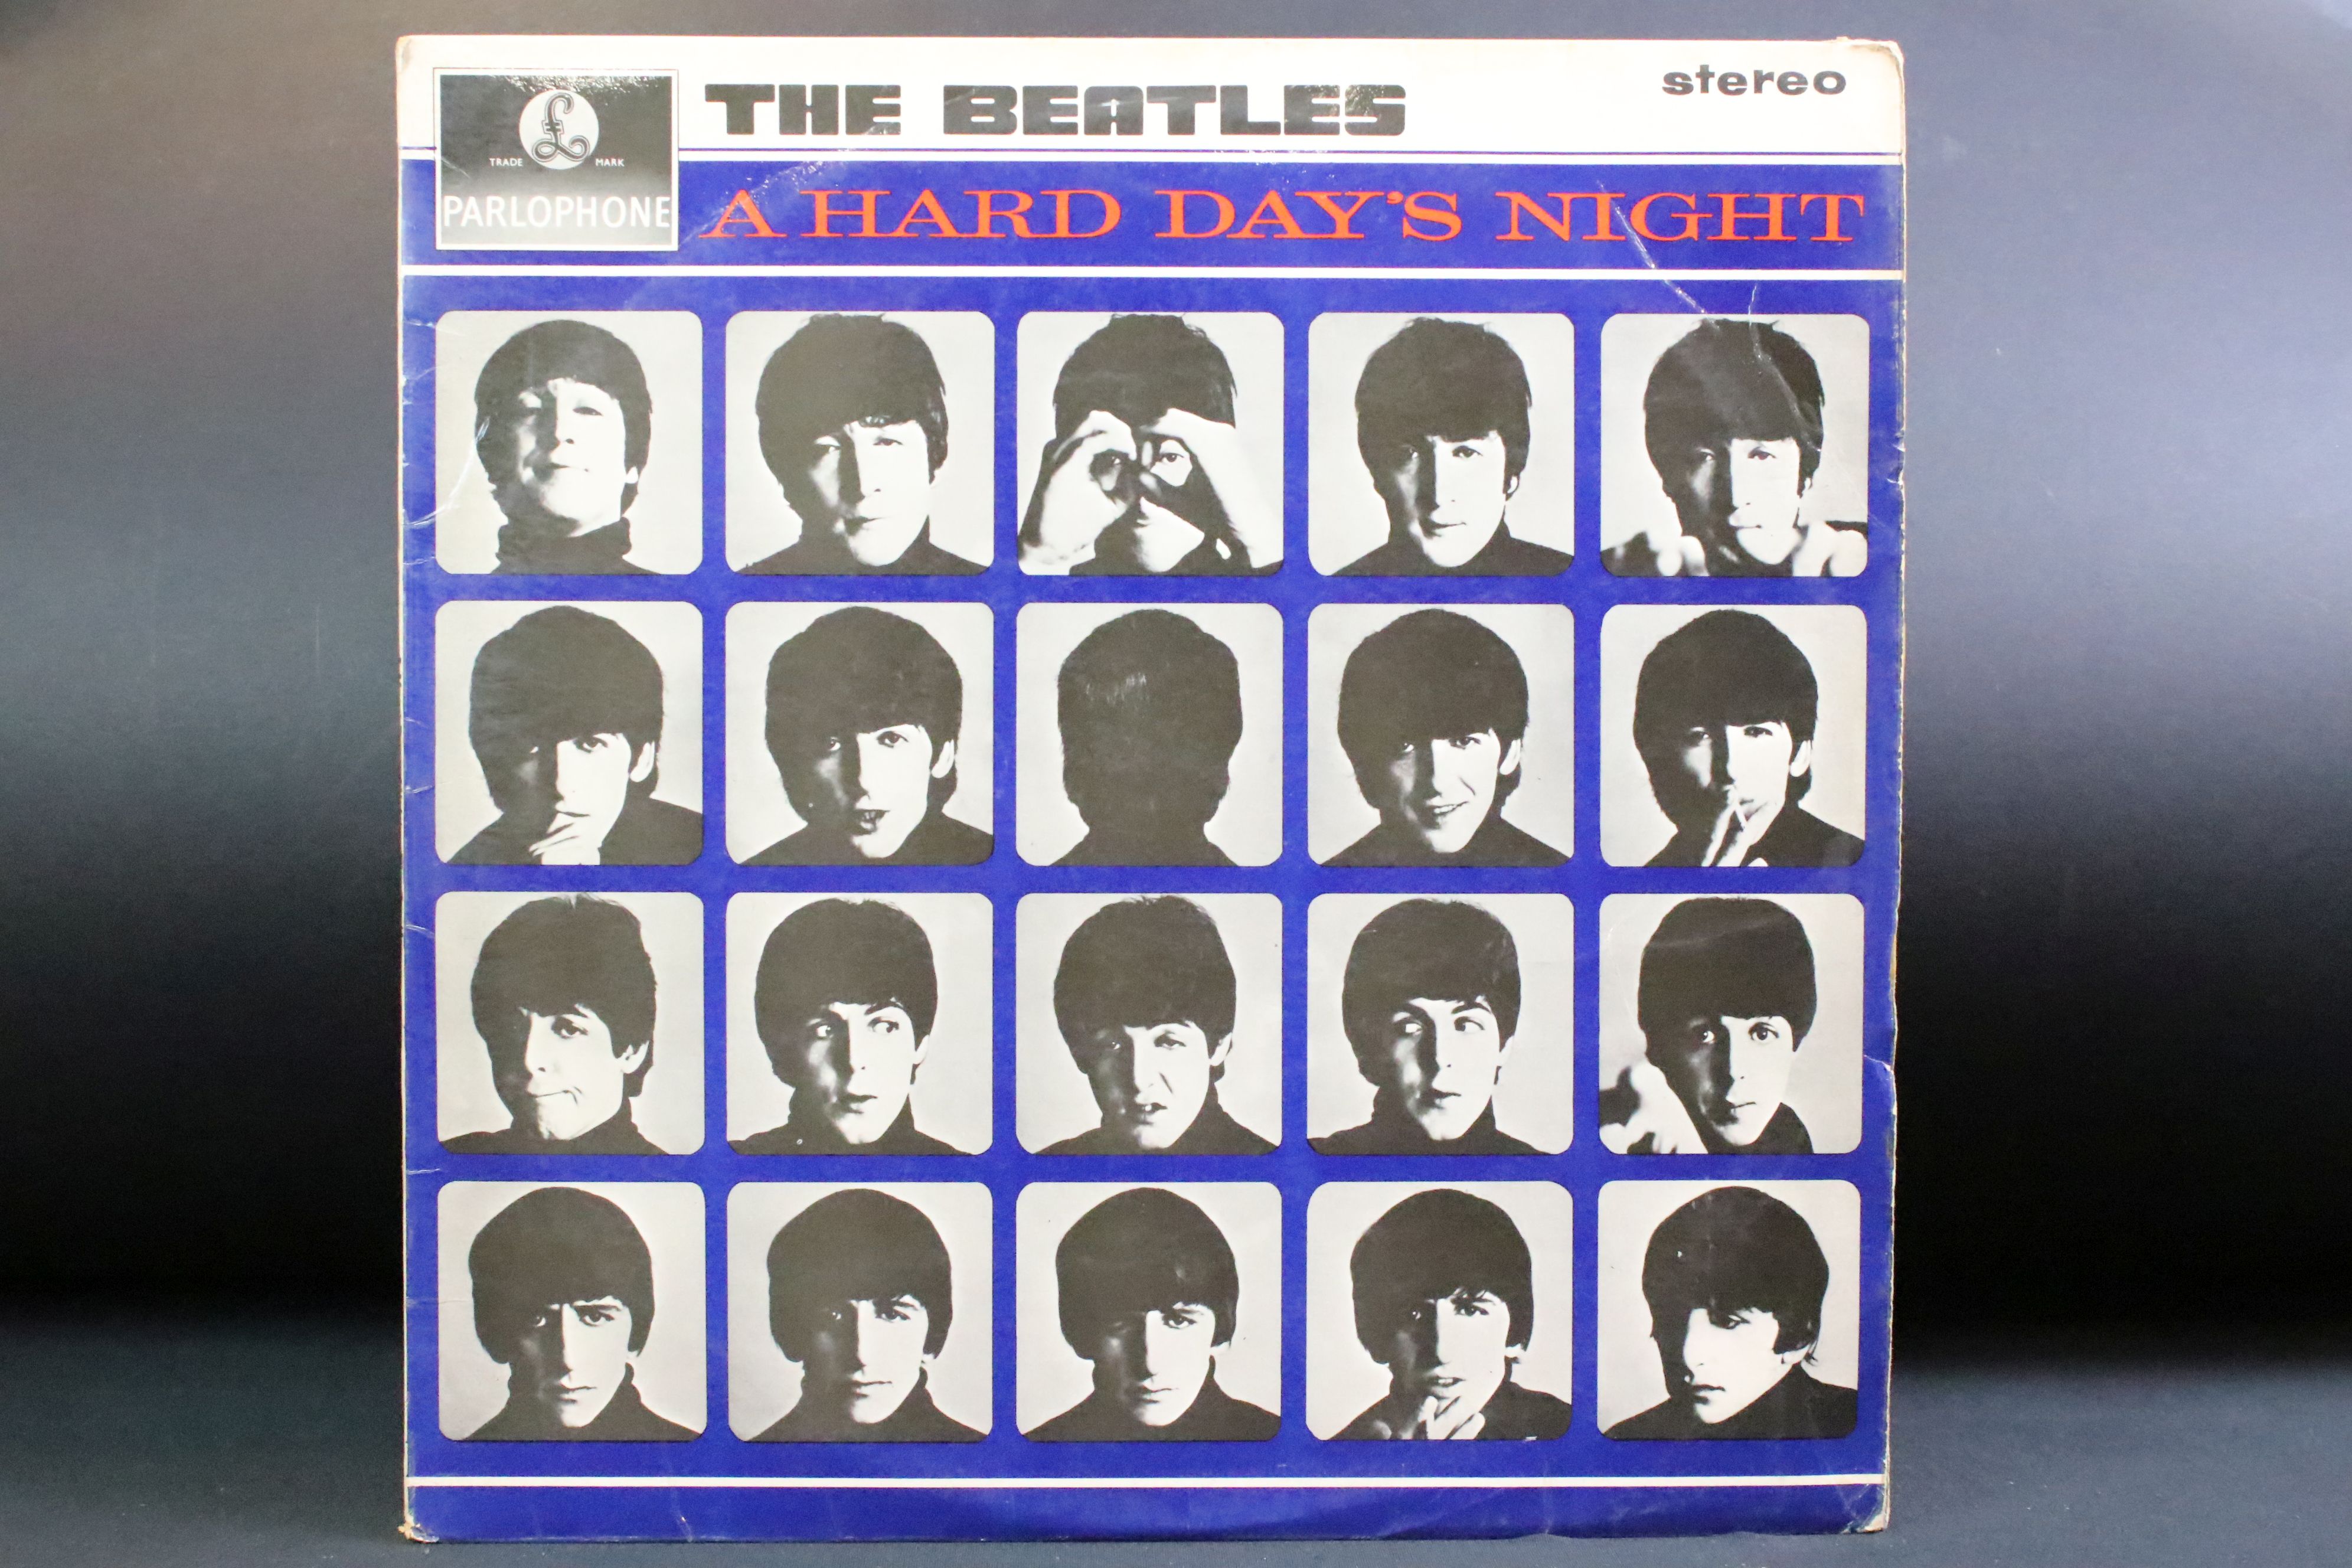 Vinyl - 7 The Beatles LPs to include Sgt Pepper, Revolver, Hard Days Night, Rubber Soul, Help!, With - Image 4 of 8